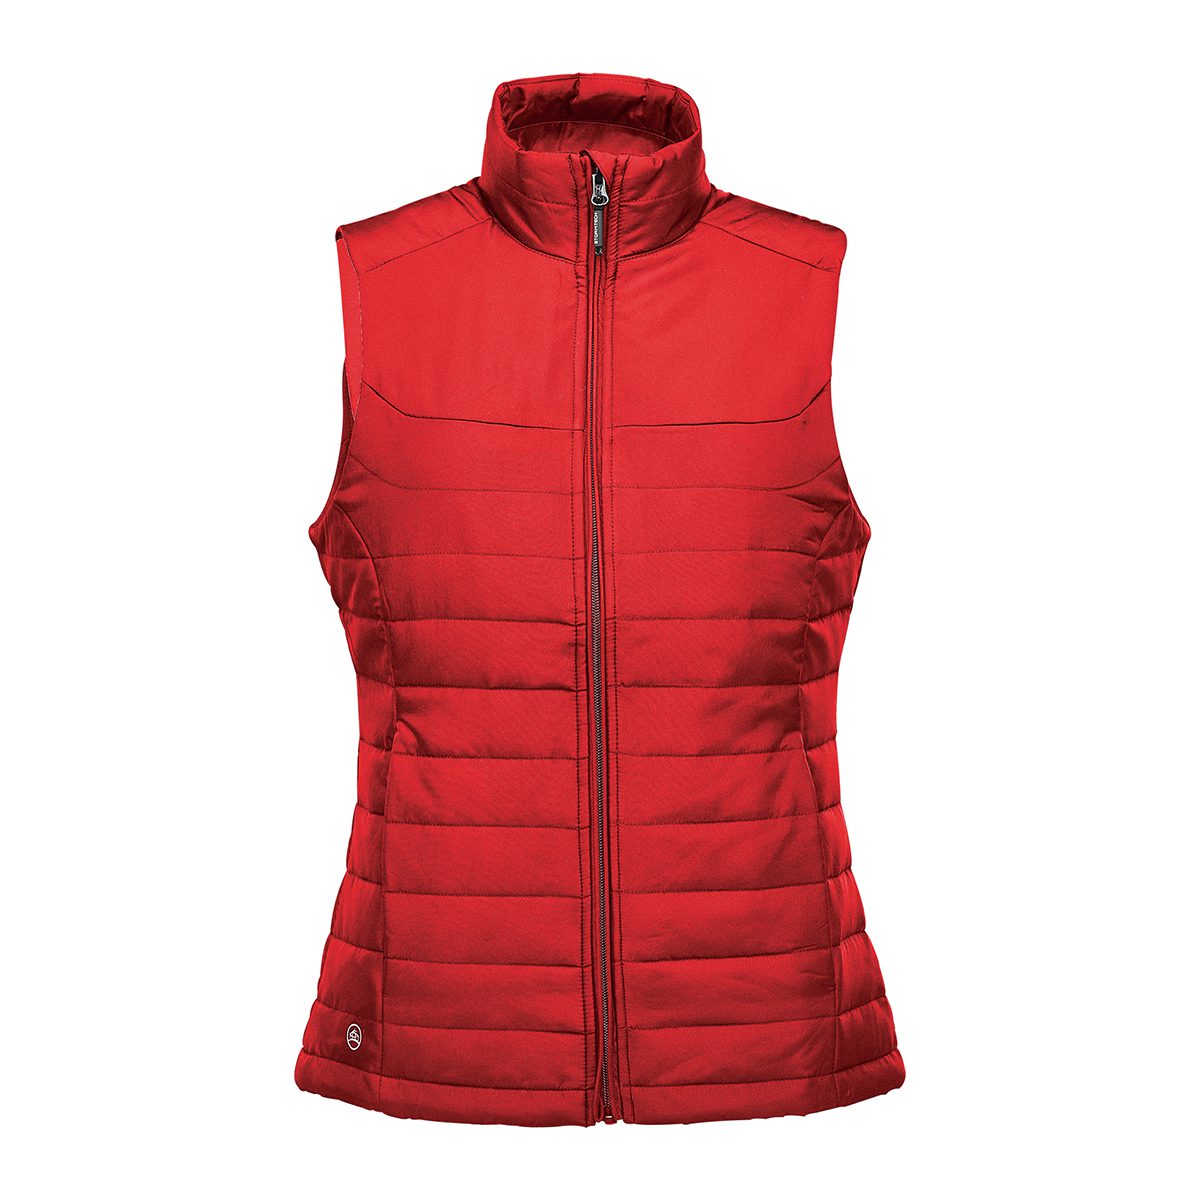 Stormtech Women's Nautilus Quilted Vest #KXV-1W Red